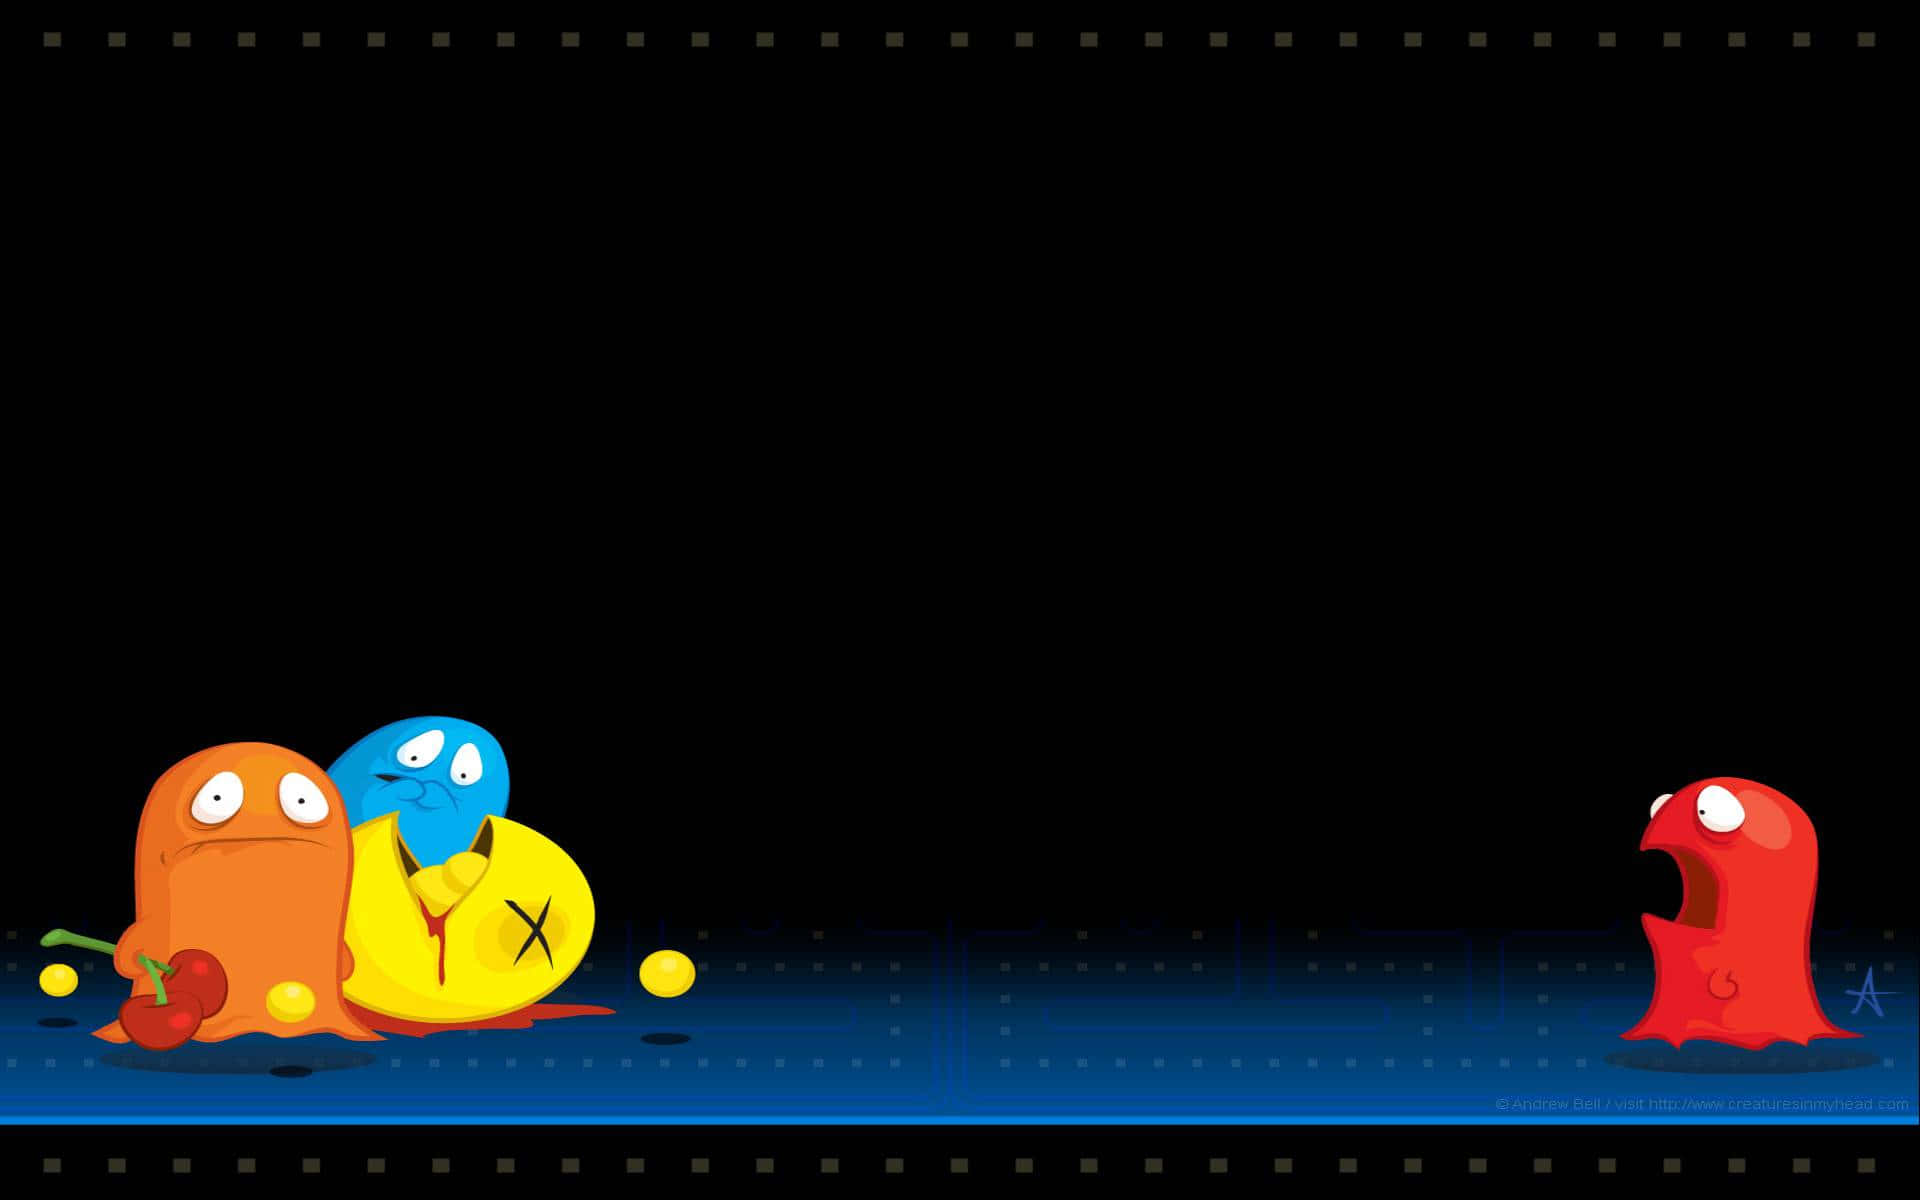 The Classic Pac-Man chasing ghosts in an 8-bit maze